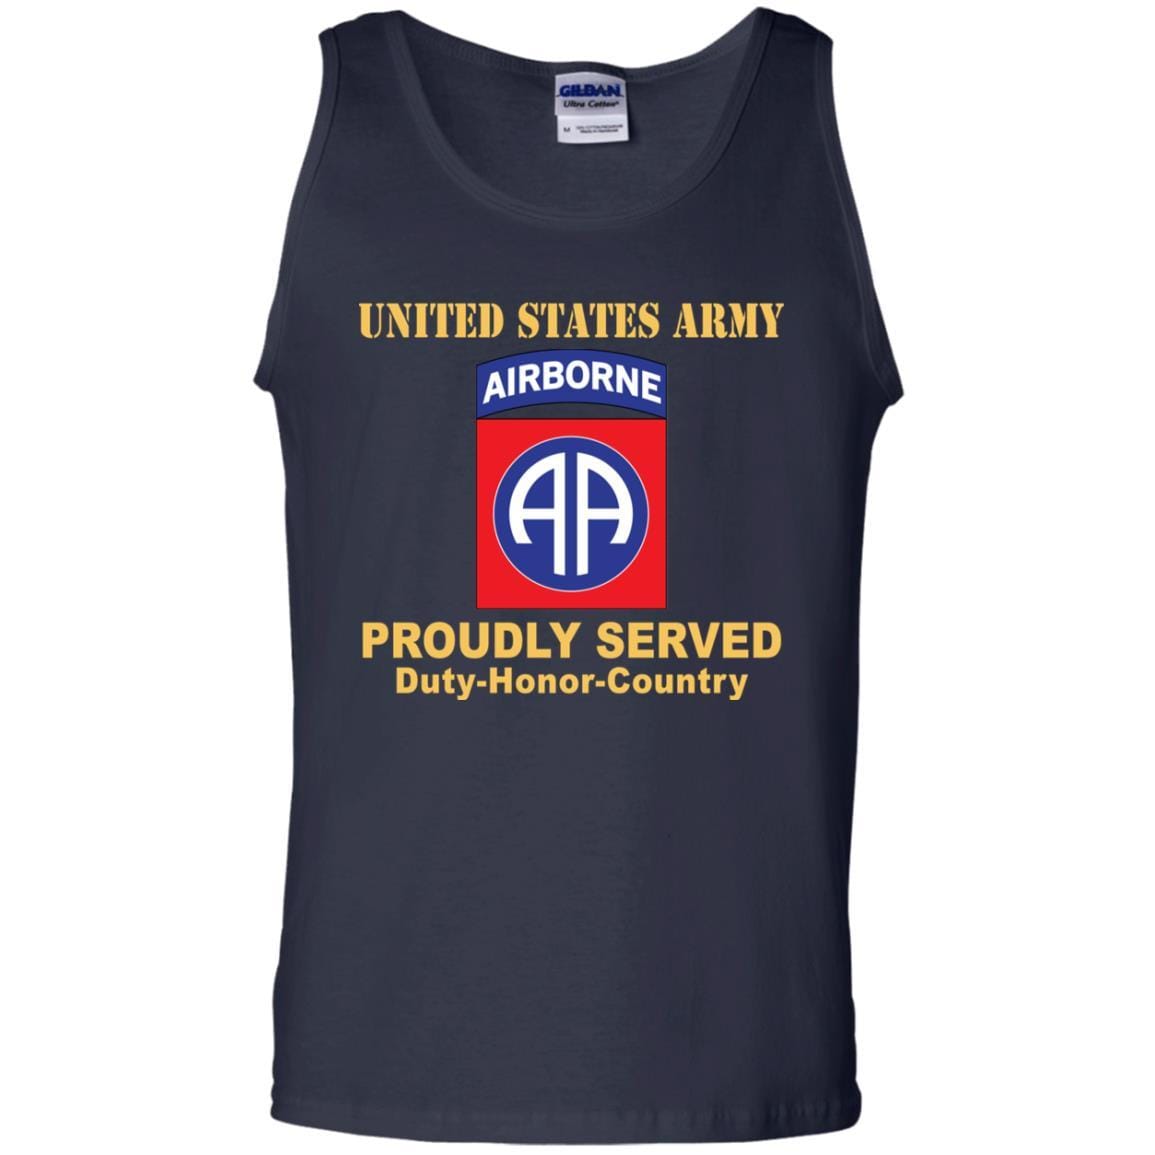 US ARMY 82ND AIRBORNE DIVISION - Proudly Served T-Shirt On Front For Men-TShirt-Army-Veterans Nation